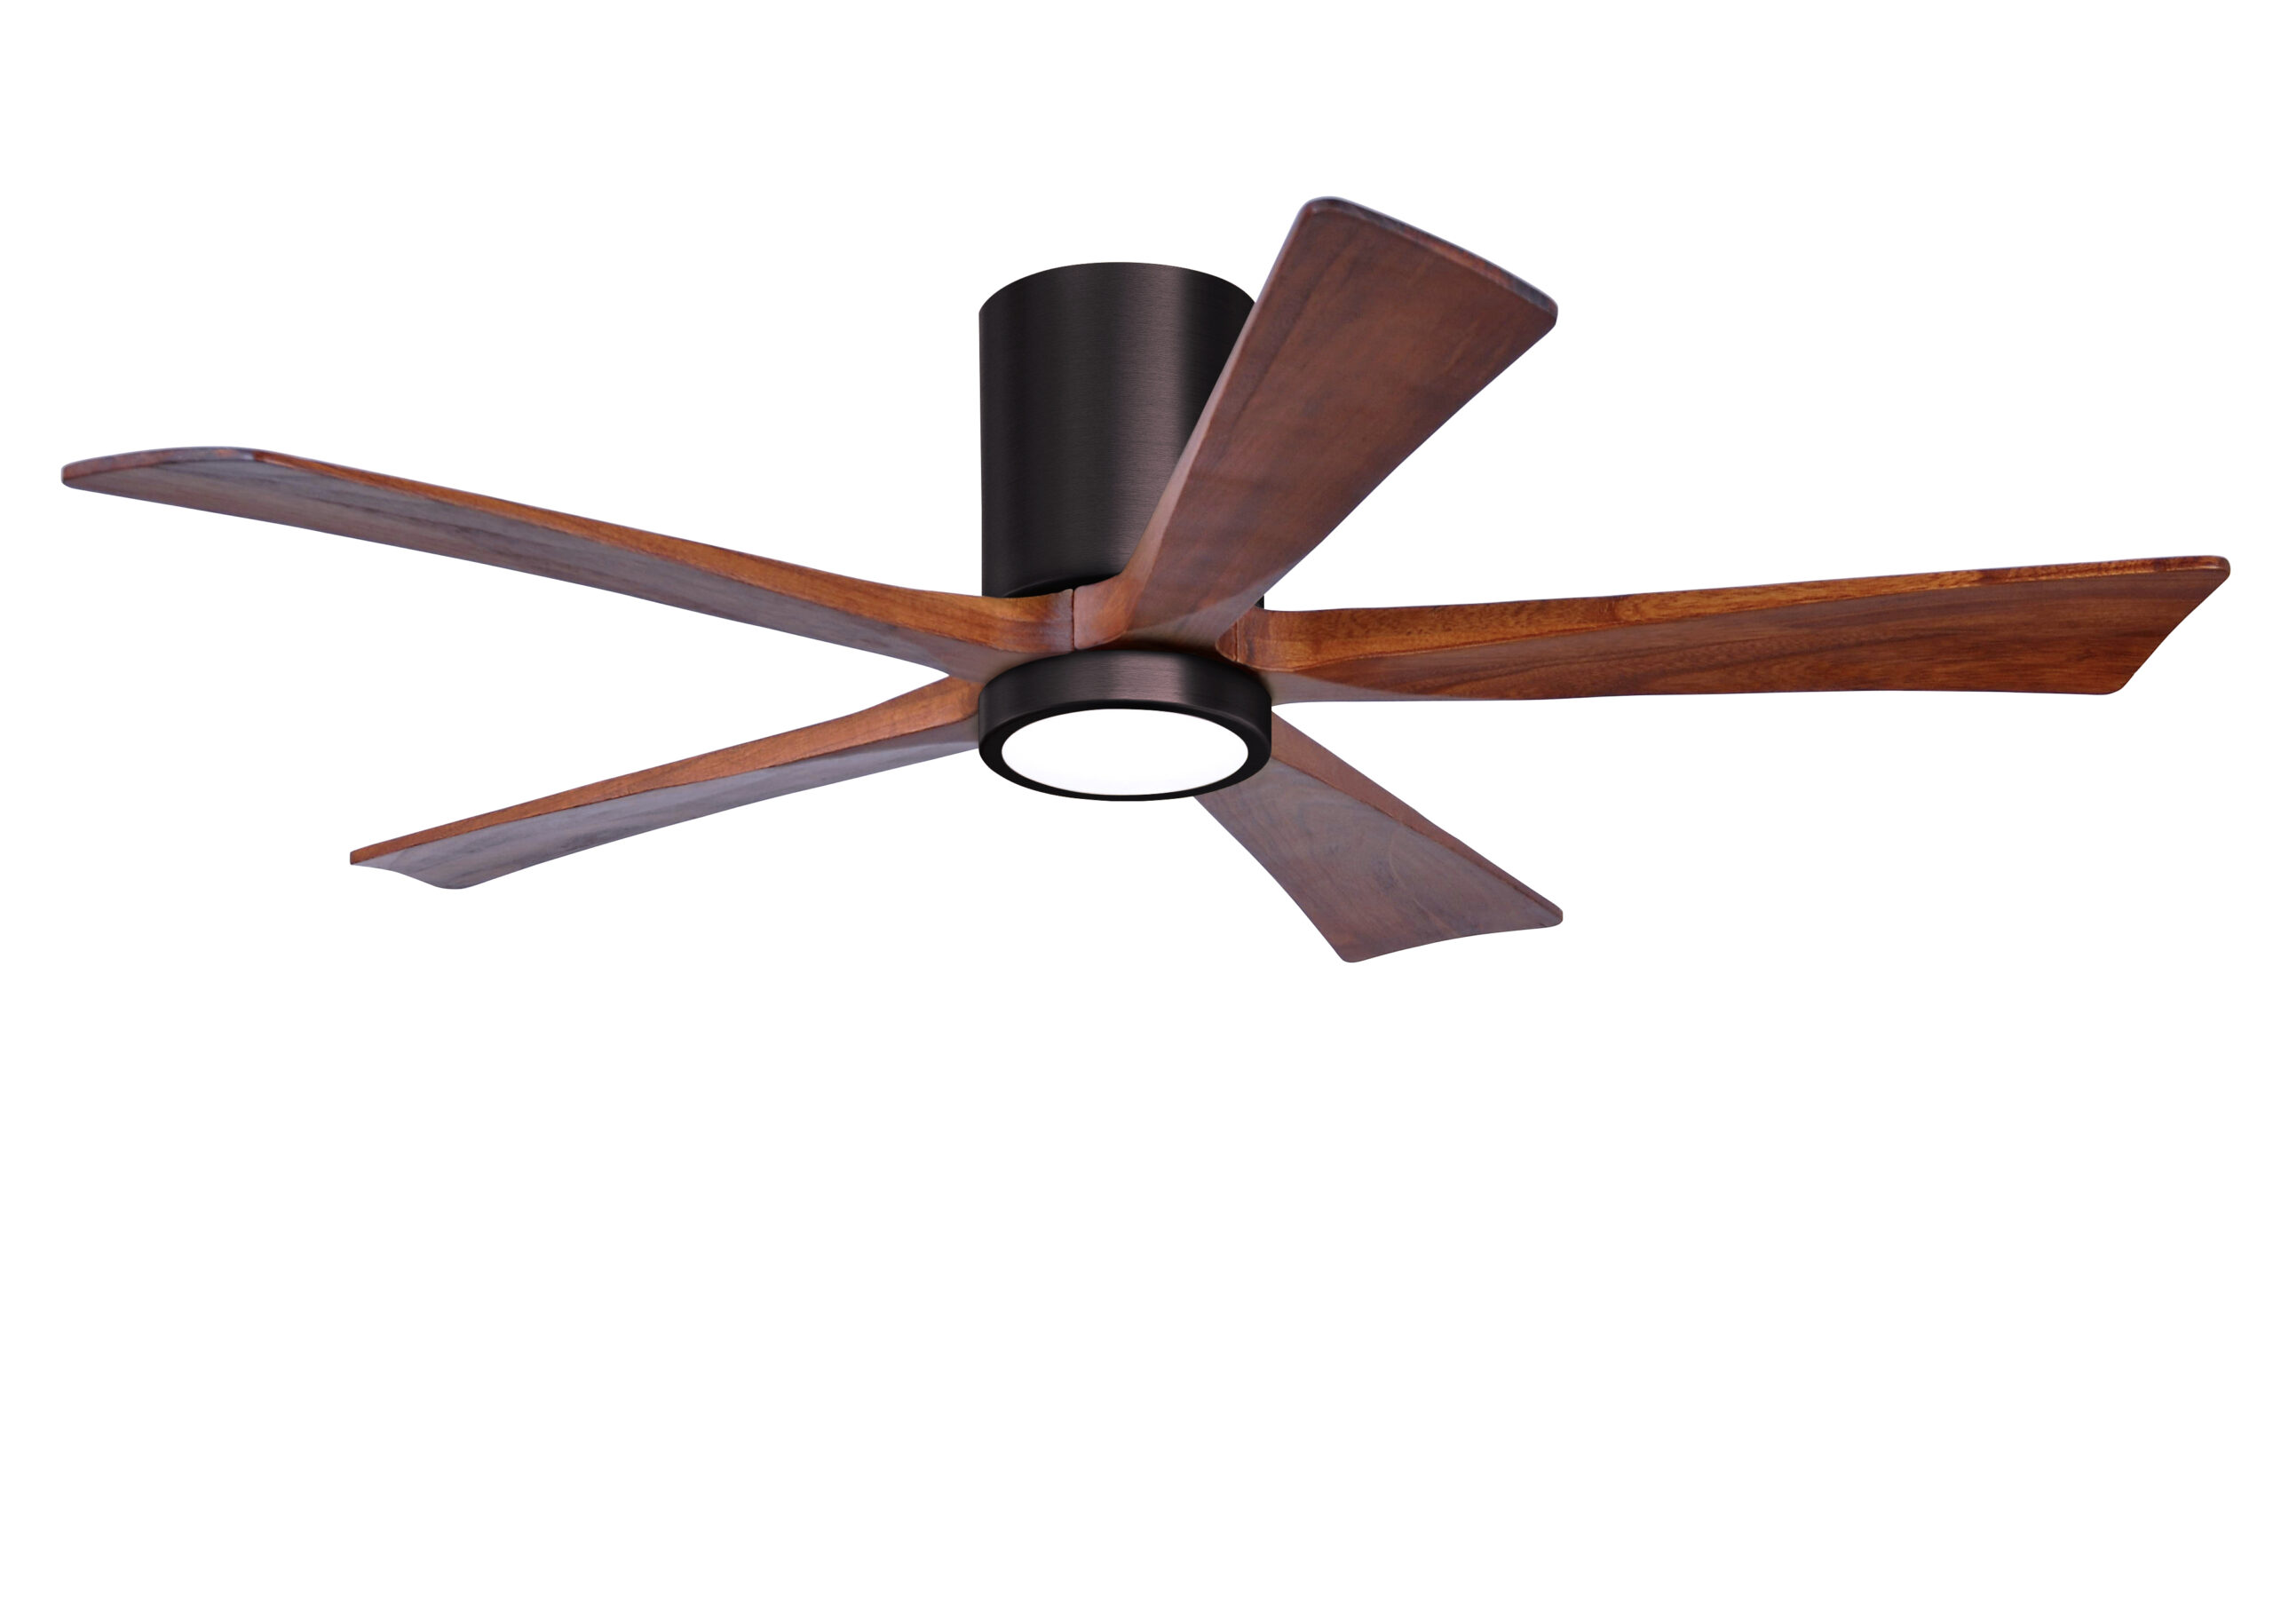 Irene-5HLK Ceiling Fan in Brushed Bronze Finish with 52